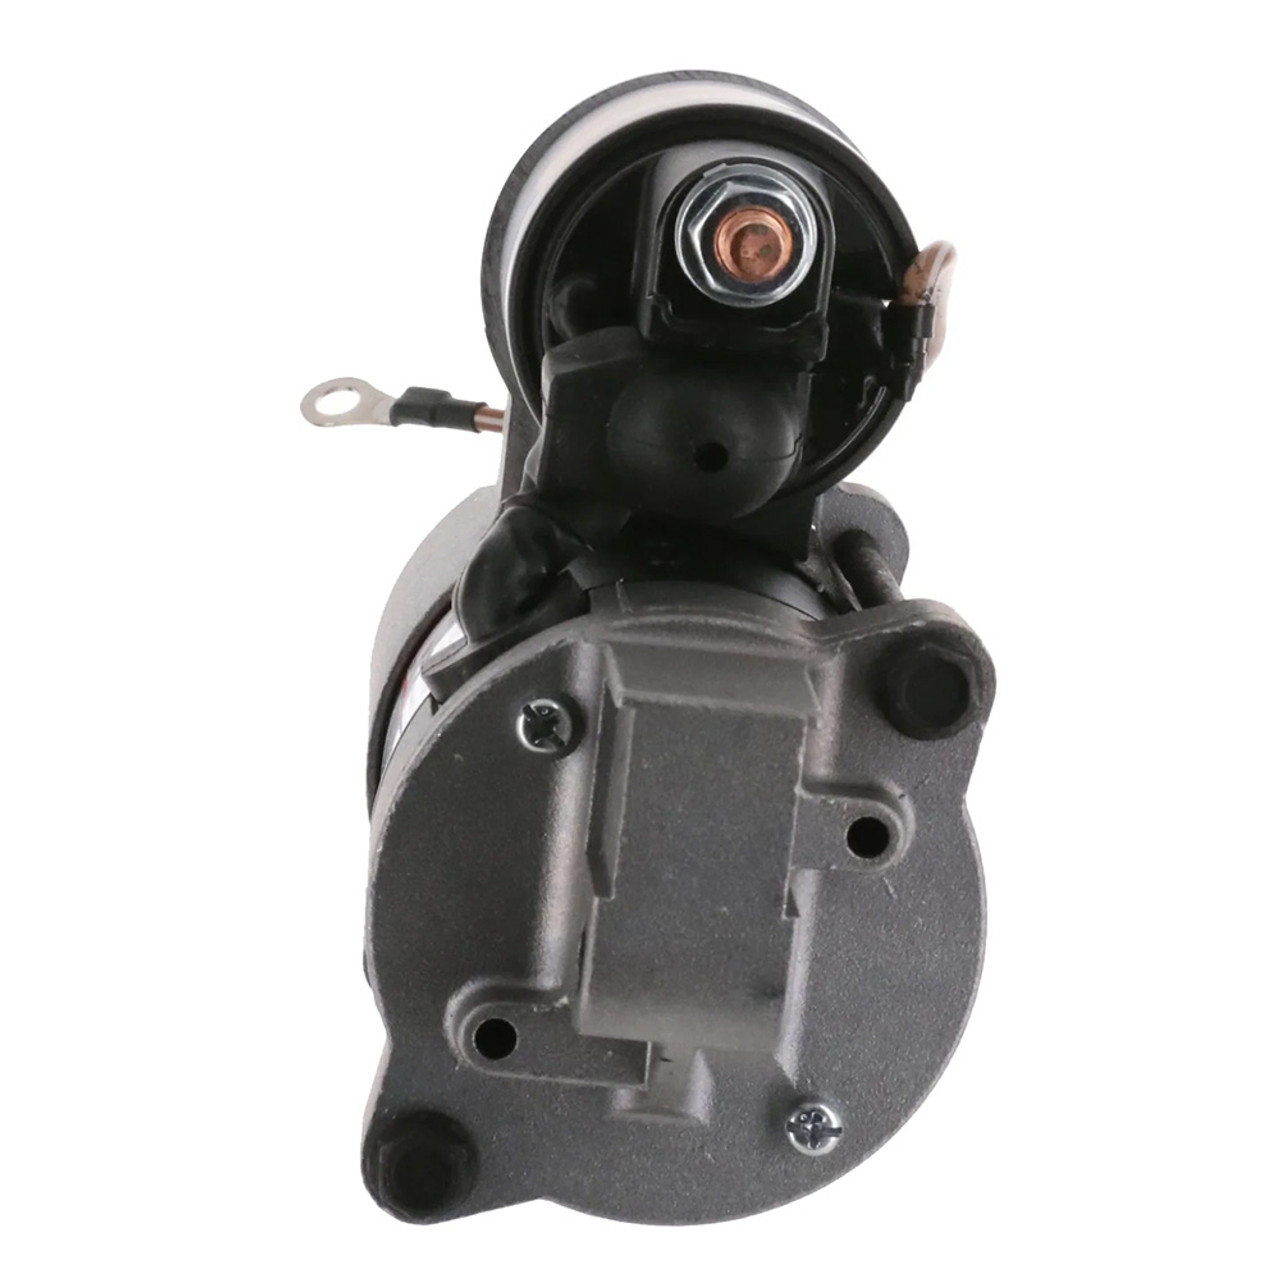 ARCO Marine Premium Replacement Outboard Starter f\/Yamaha F115, 4 Stroke [3432]